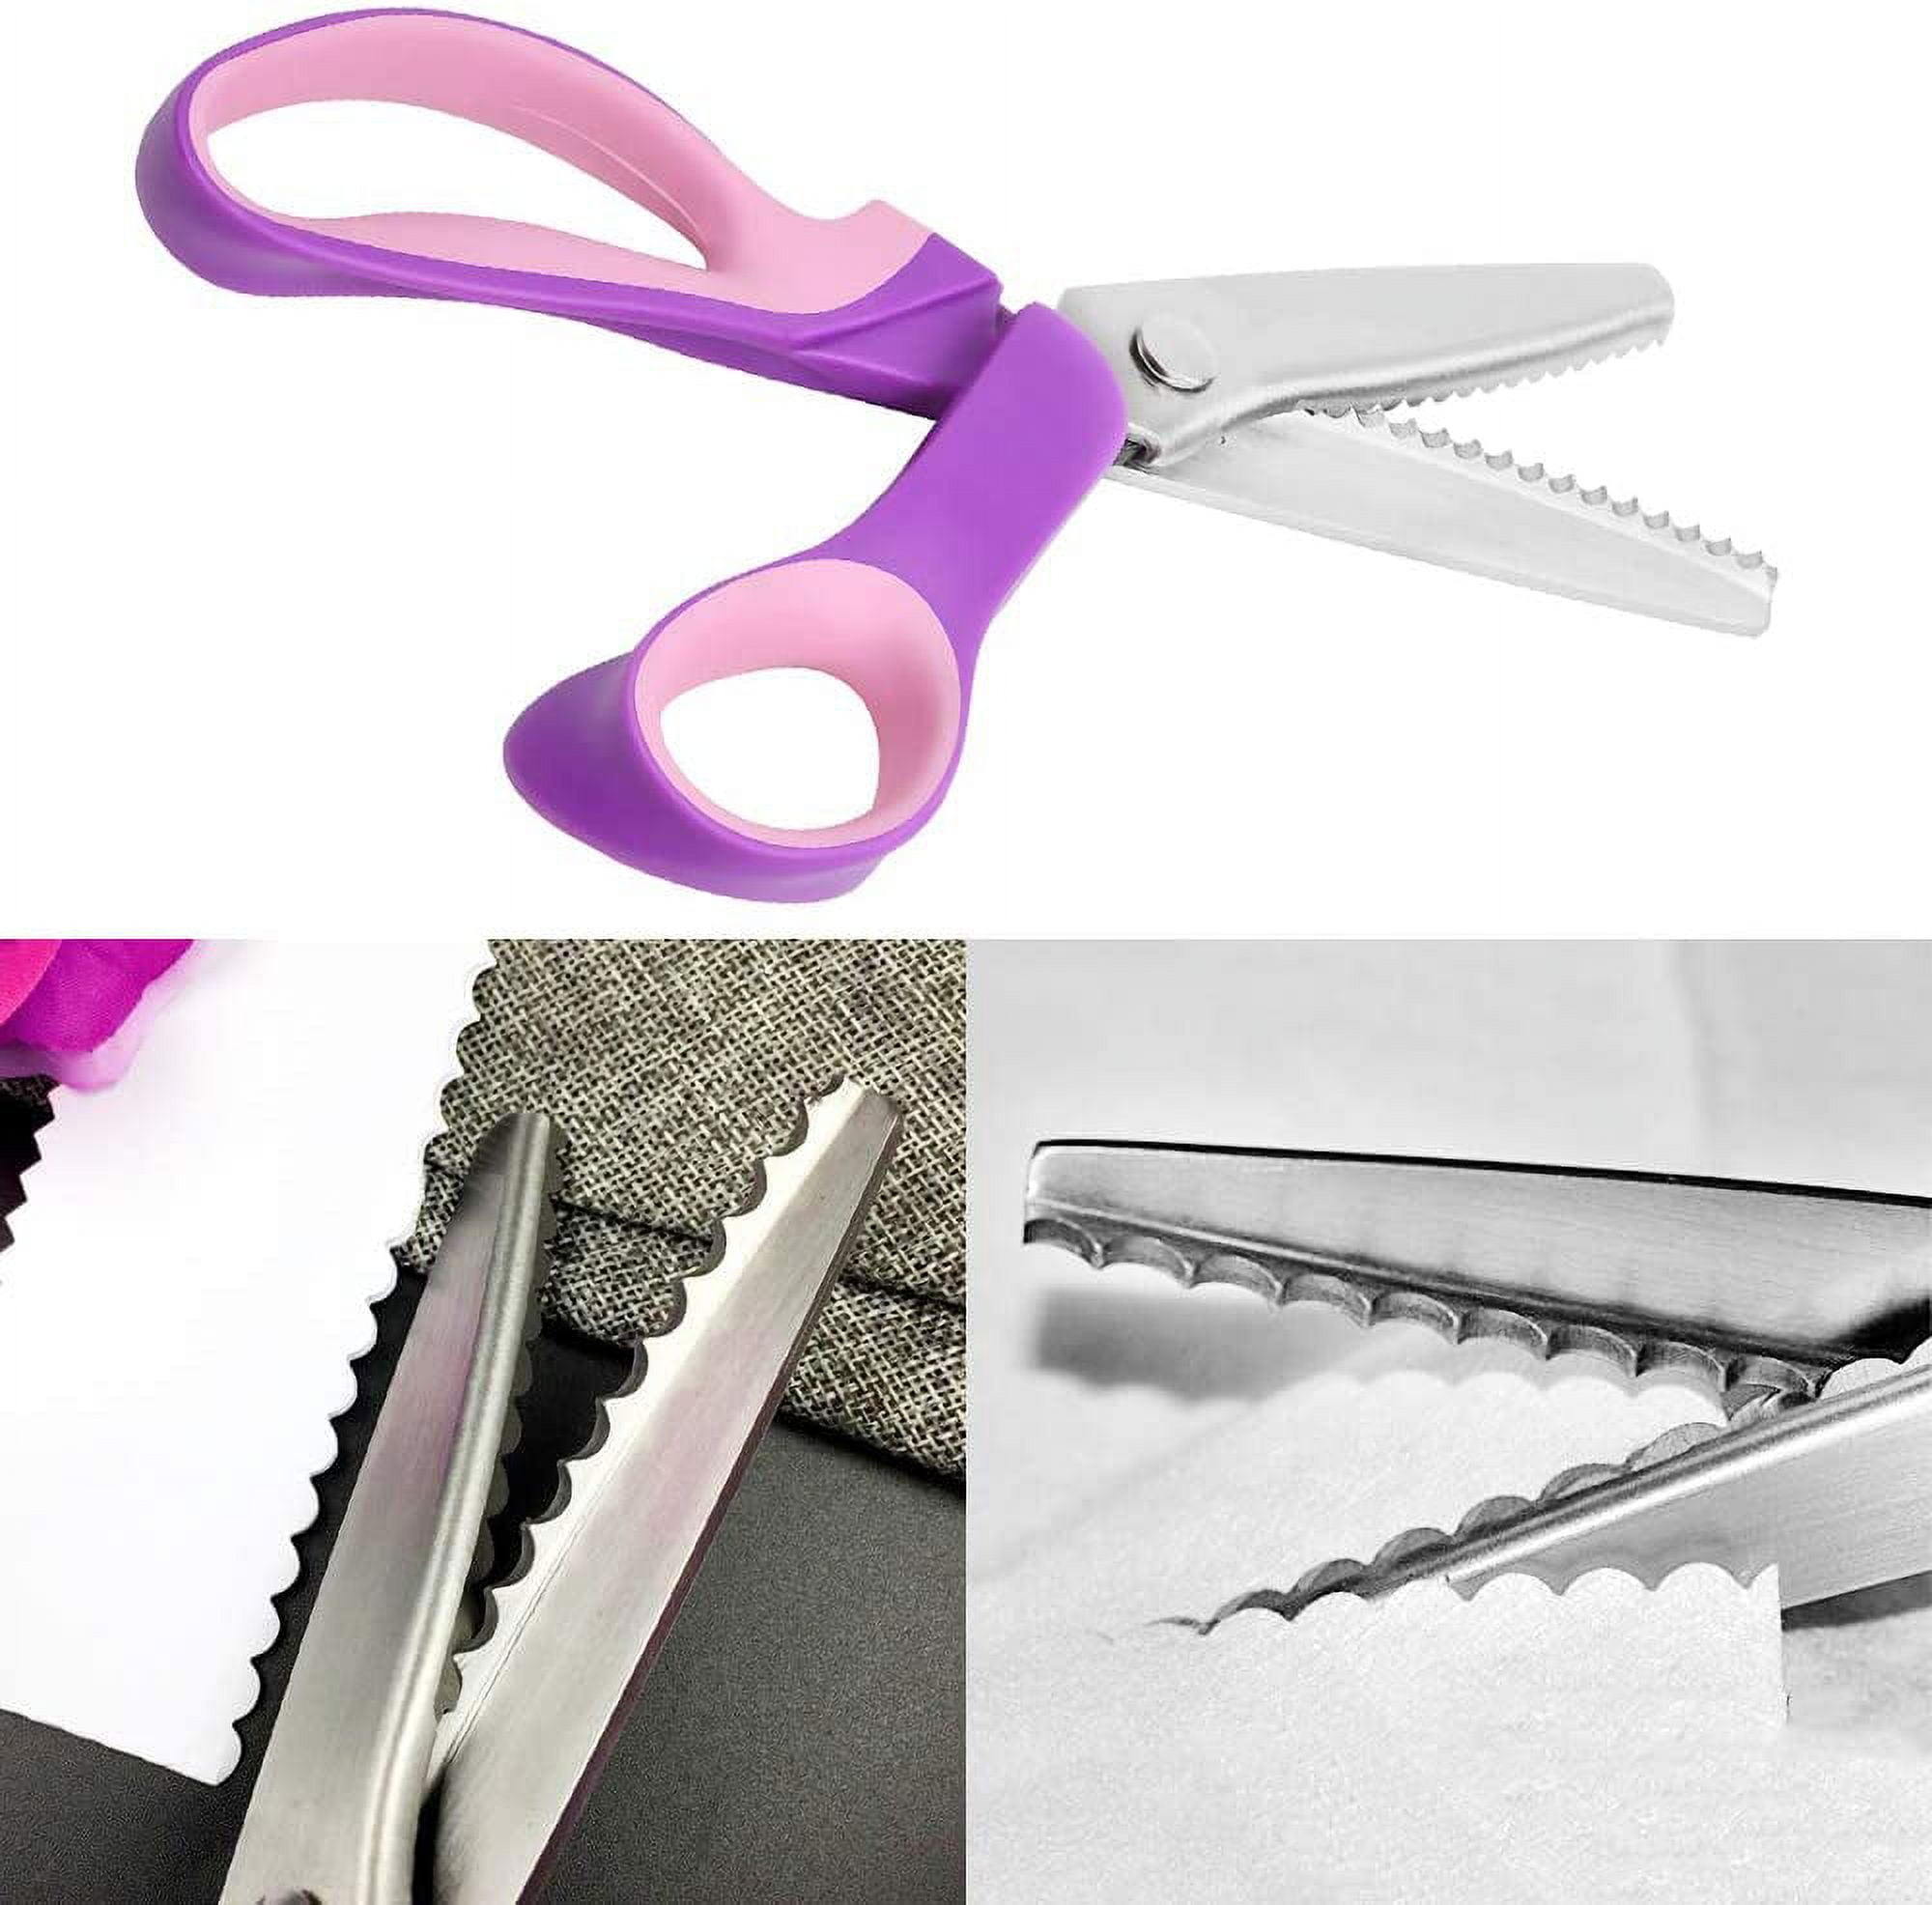  Zig Zag Scissors, Professional Pinking Shears, Different Size  Serrated and Scalloped Blades for Linings,Leather,Paper and Craft,  Stainless Steel Dressmaking Sewing Scissors- Serrated 5mm